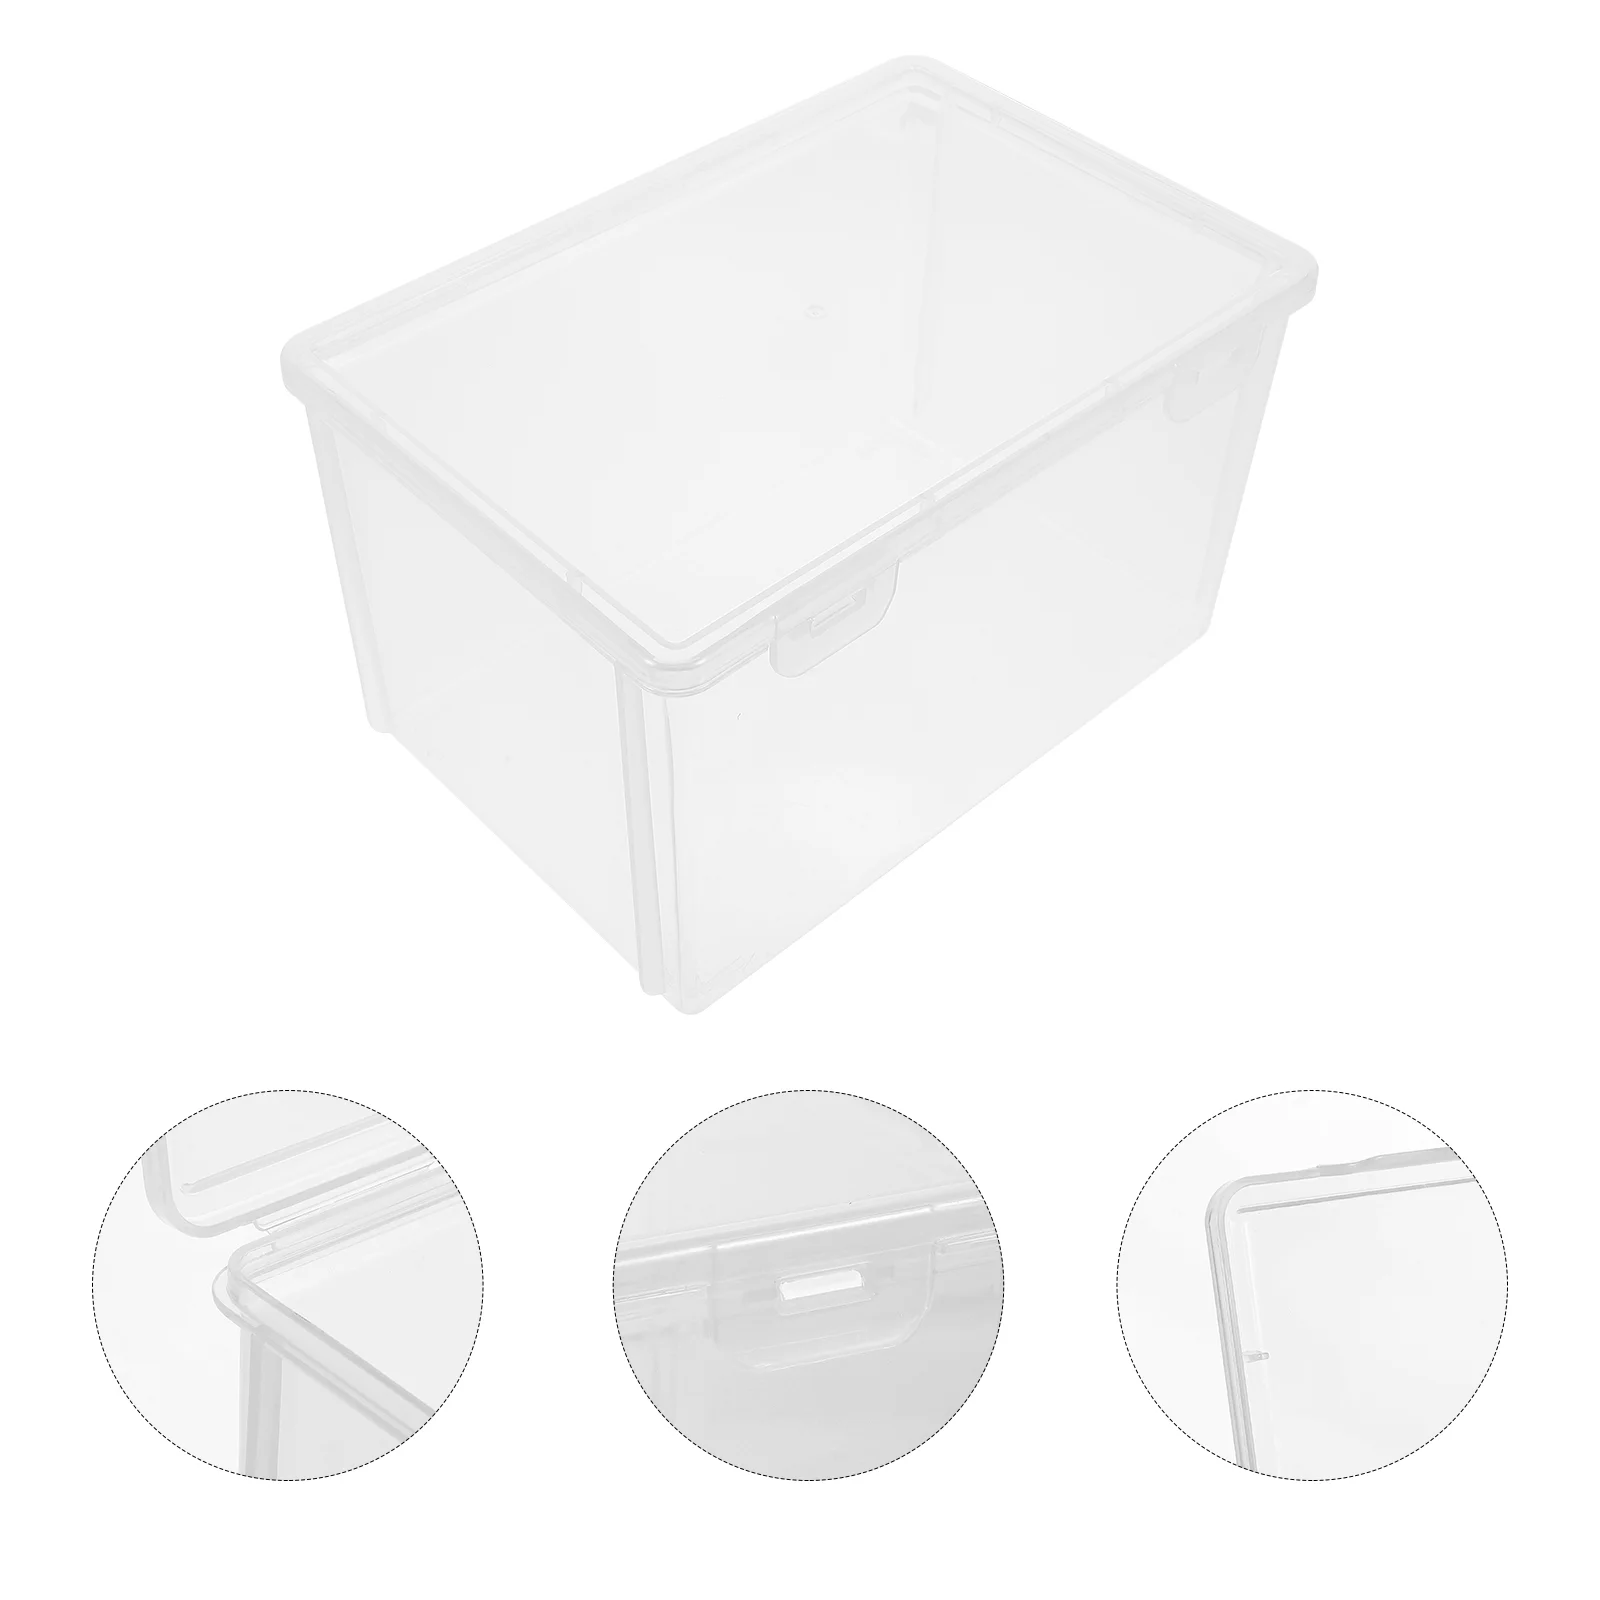 

Bread Container Box Storage Keeper Dispenser Loaf Case Clear Containers Holder Toast Cake Refrigerator Bin Airtight Kitchen